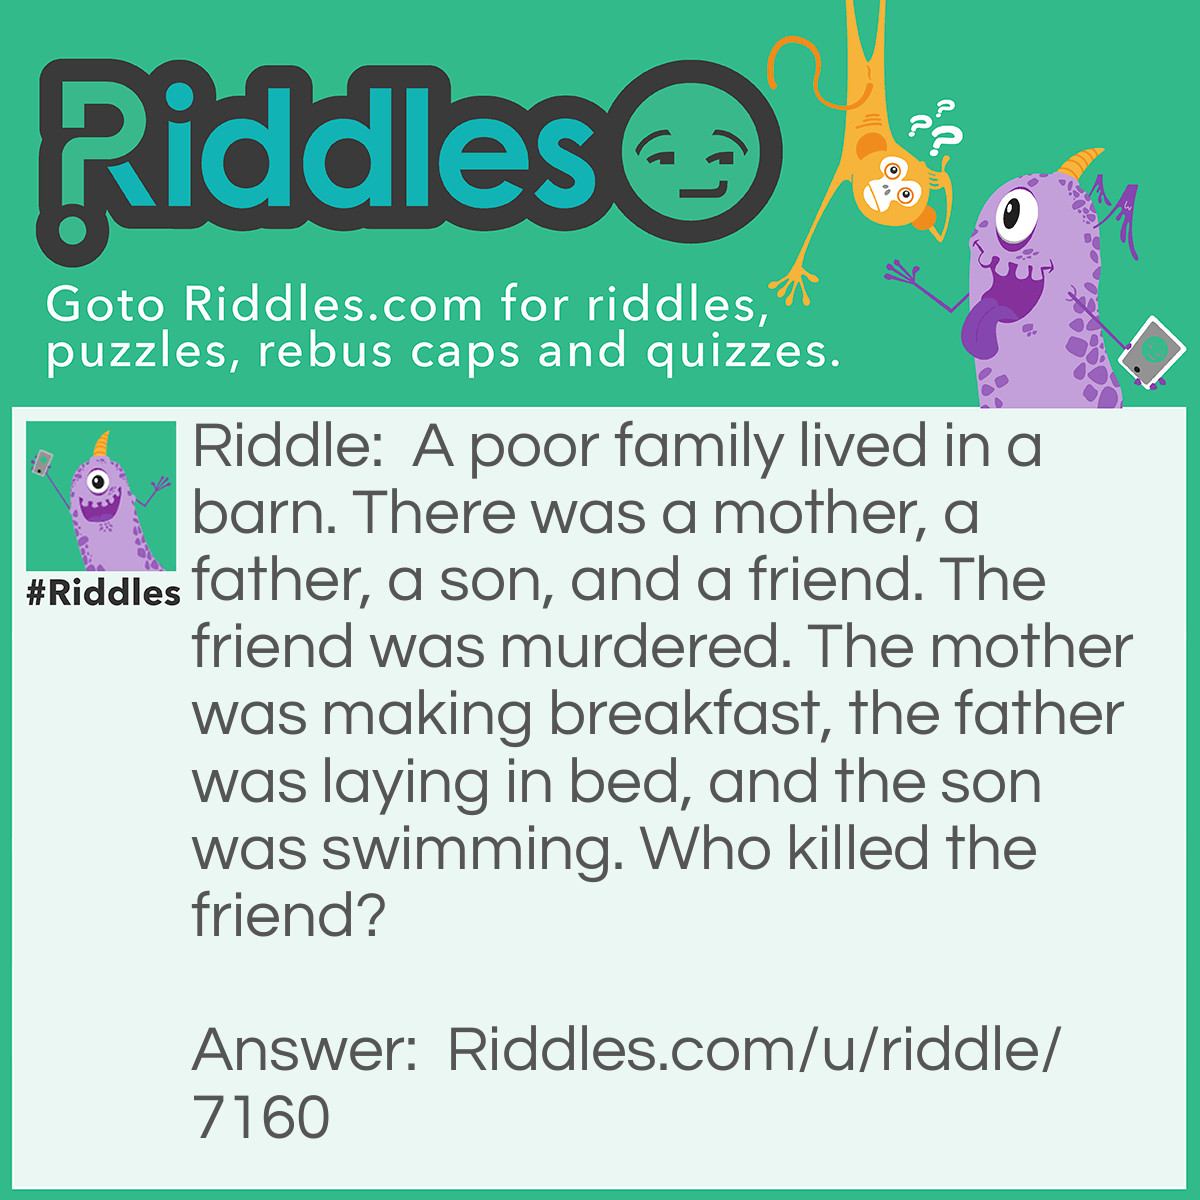 Riddle: A poor family lived in a barn. There was a mother, a father, a son, and a friend. The friend was murdered. The mother was making breakfast, the father was laying in bed, and the son was swimming. Who killed the friend? Answer: The son killed the friend, because they couldn't afford a pool.